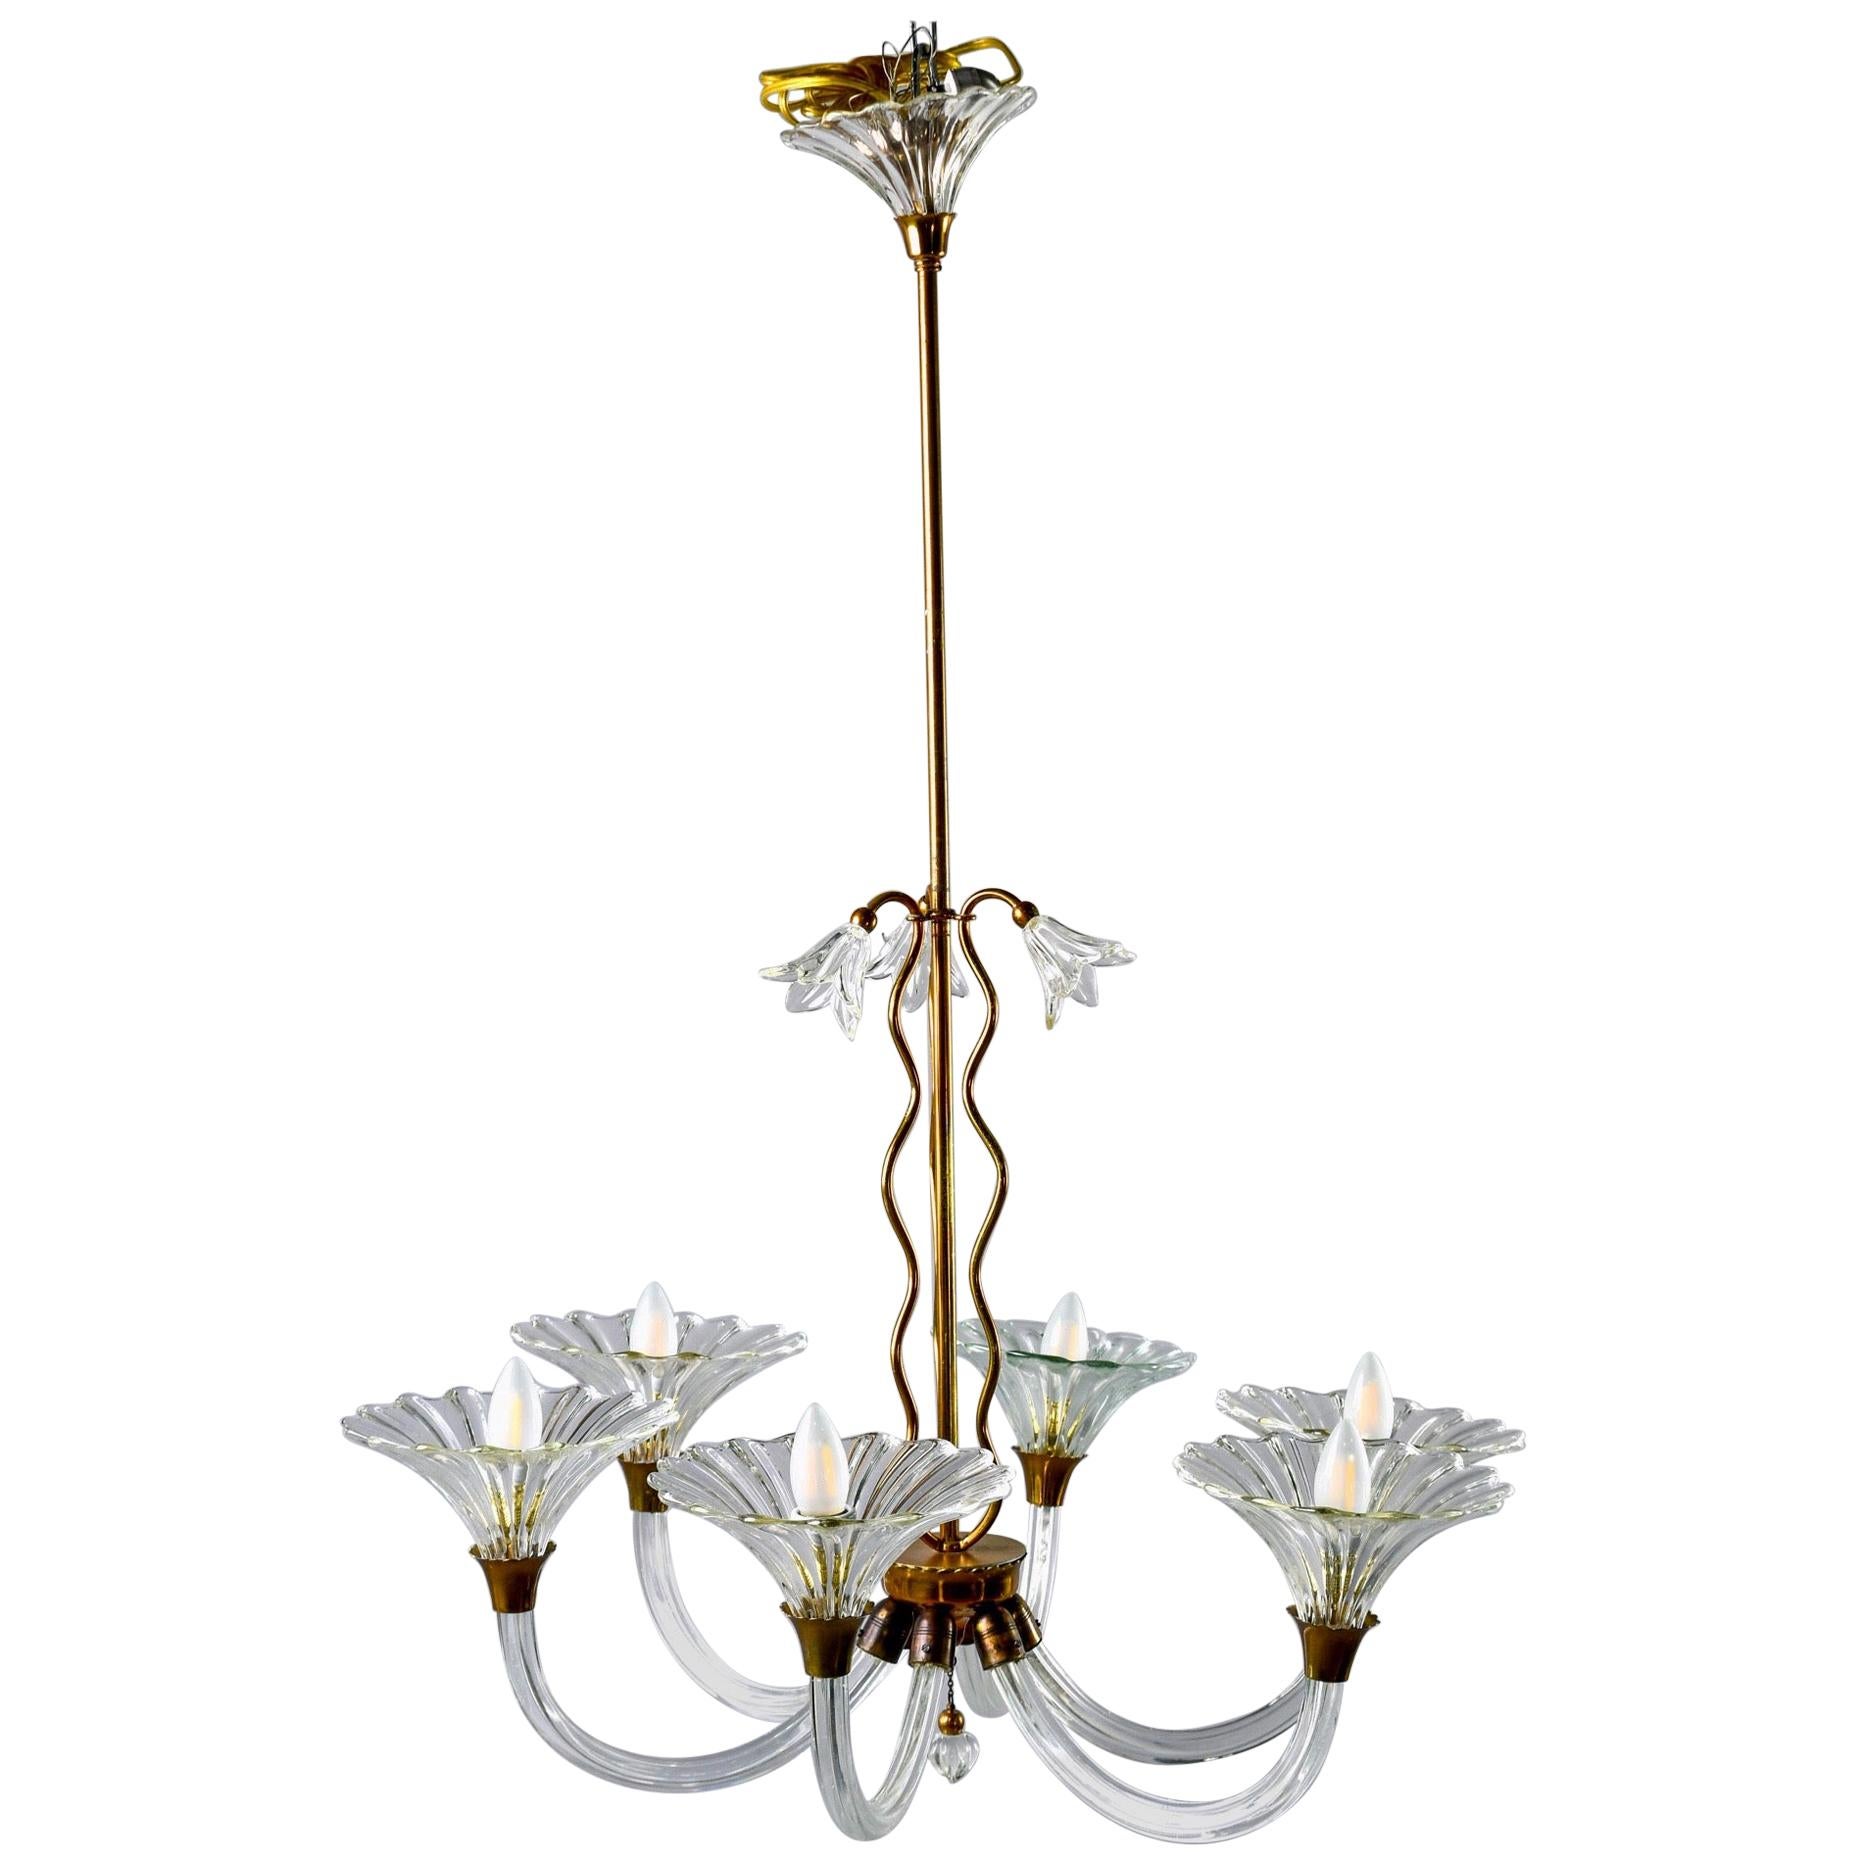 Barovier and Toso Six-Arm Chandelier with Brass Fittings